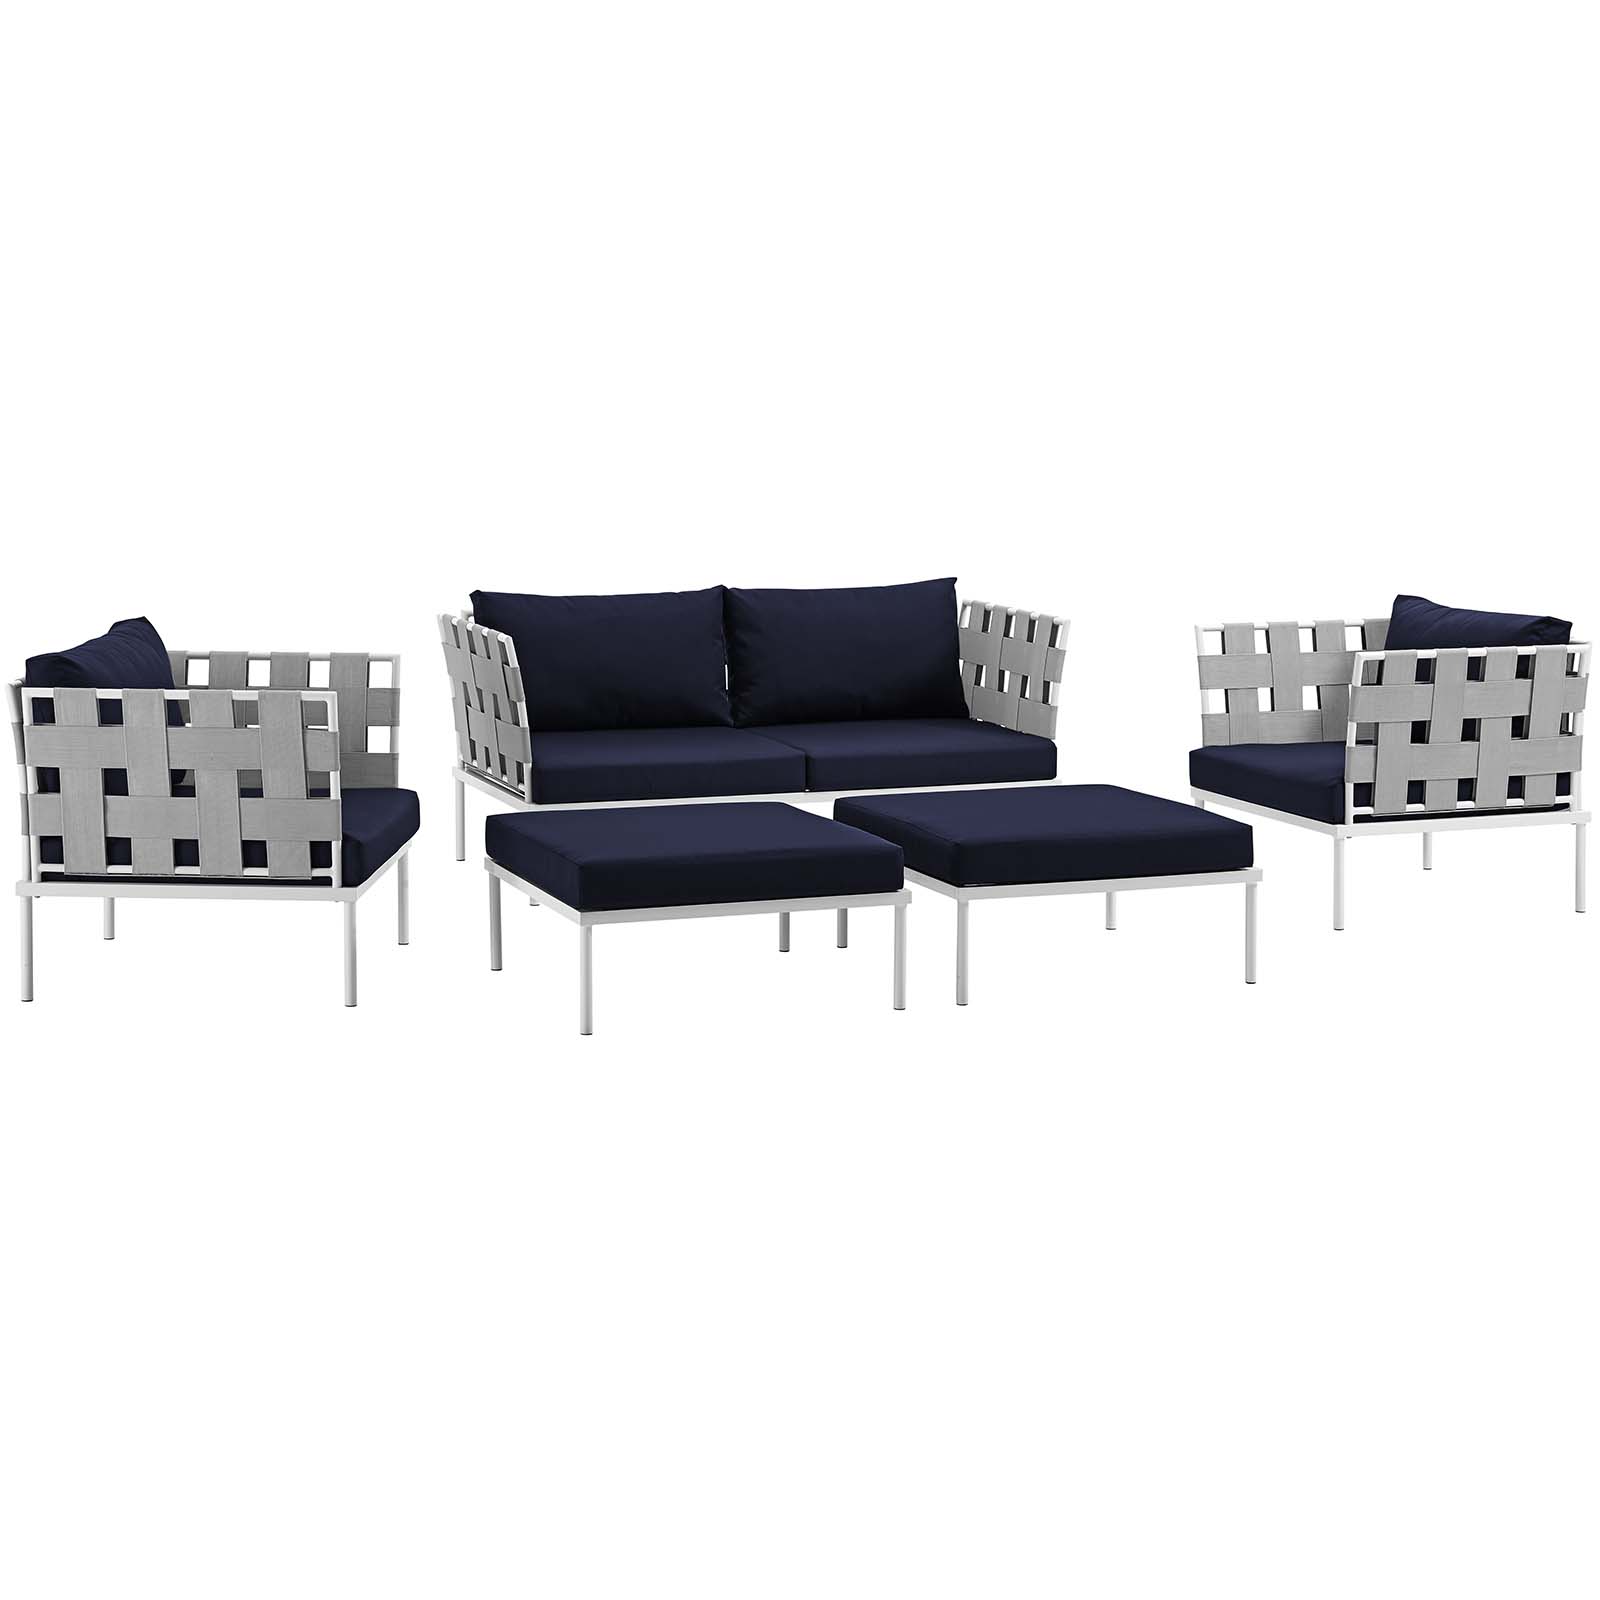 Modway Harmony 5 Piece Outdoor Patio Aluminum Sectional Sofa Set in White Navy - image 2 of 7